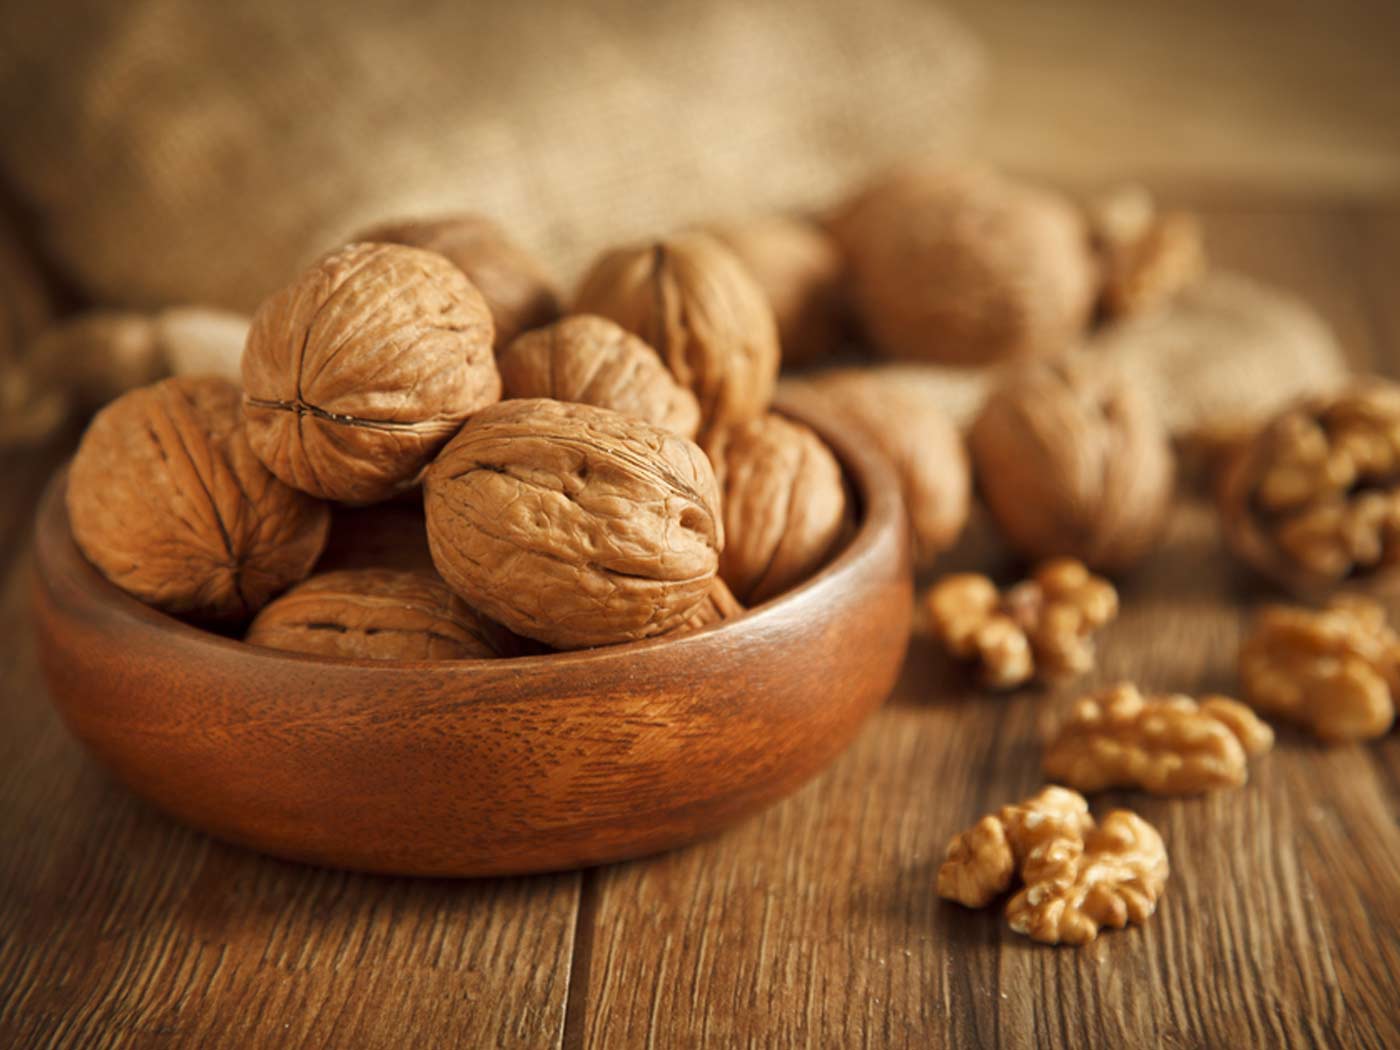 5 Promising benefits of walnut oil for healthy skin and hair